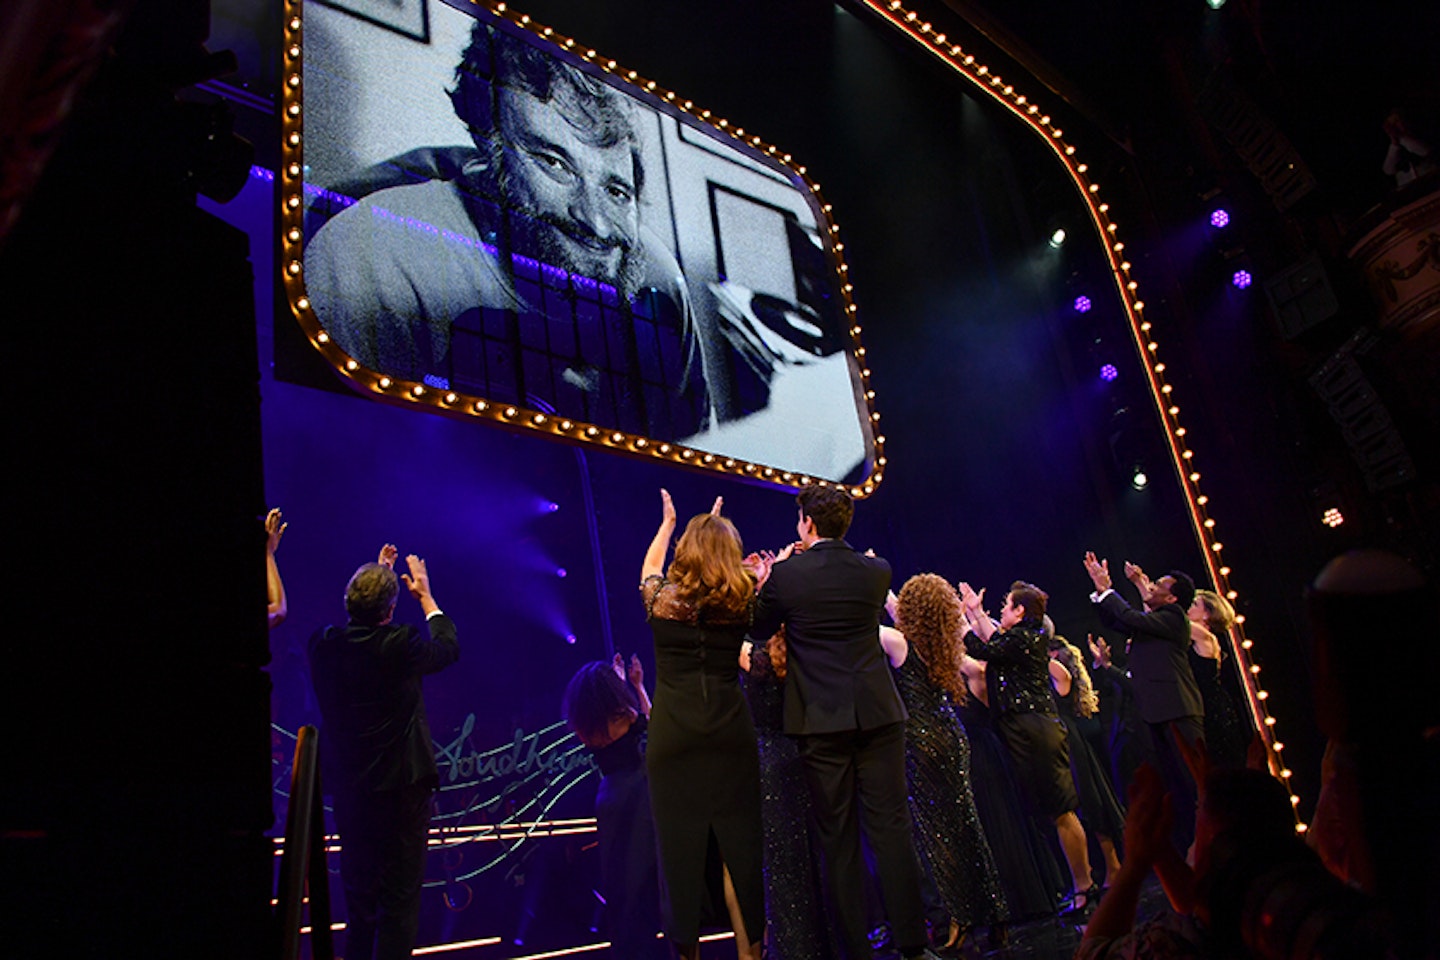 LONDON, ENGLAND - OCTOBER 03: (L-R) Christine Allado, Beatrice Penny-Touré, Jac Yarrow, Bonnie Langford, Bernadette Peters, Sir Cameron Mackintosh, Lea Salonga, Joanna Riding, Gavin Lee, Jason Pennycooke, Janie Dee, Marley Fenton, Damian Humbley and Richard Dempsey bow at the curtain call during the press night performance of "Stephen Sondheim's Old Friends" at The Gielgud Theatre on October 3, 2023 in London, England. (Photo by Jed Cullen/Dave Benett/Getty Images)